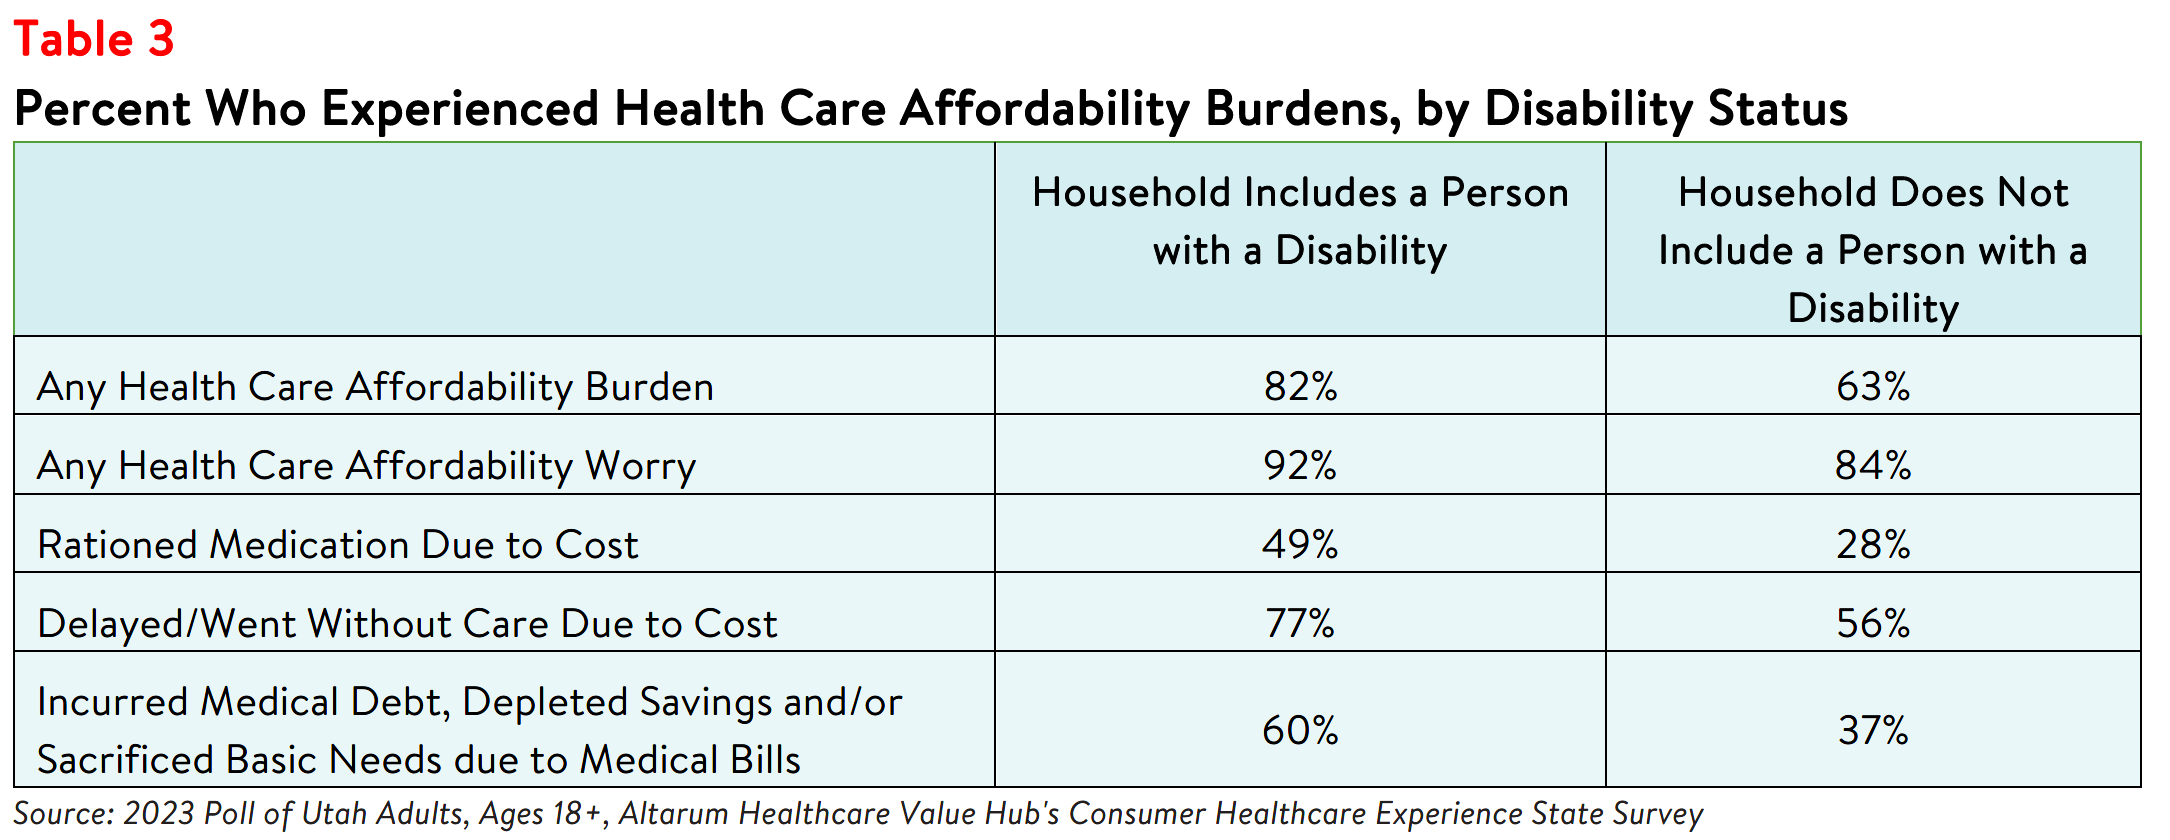 Utah Residents Bear Health Care Affordability Burdens Unequally_Table3.png